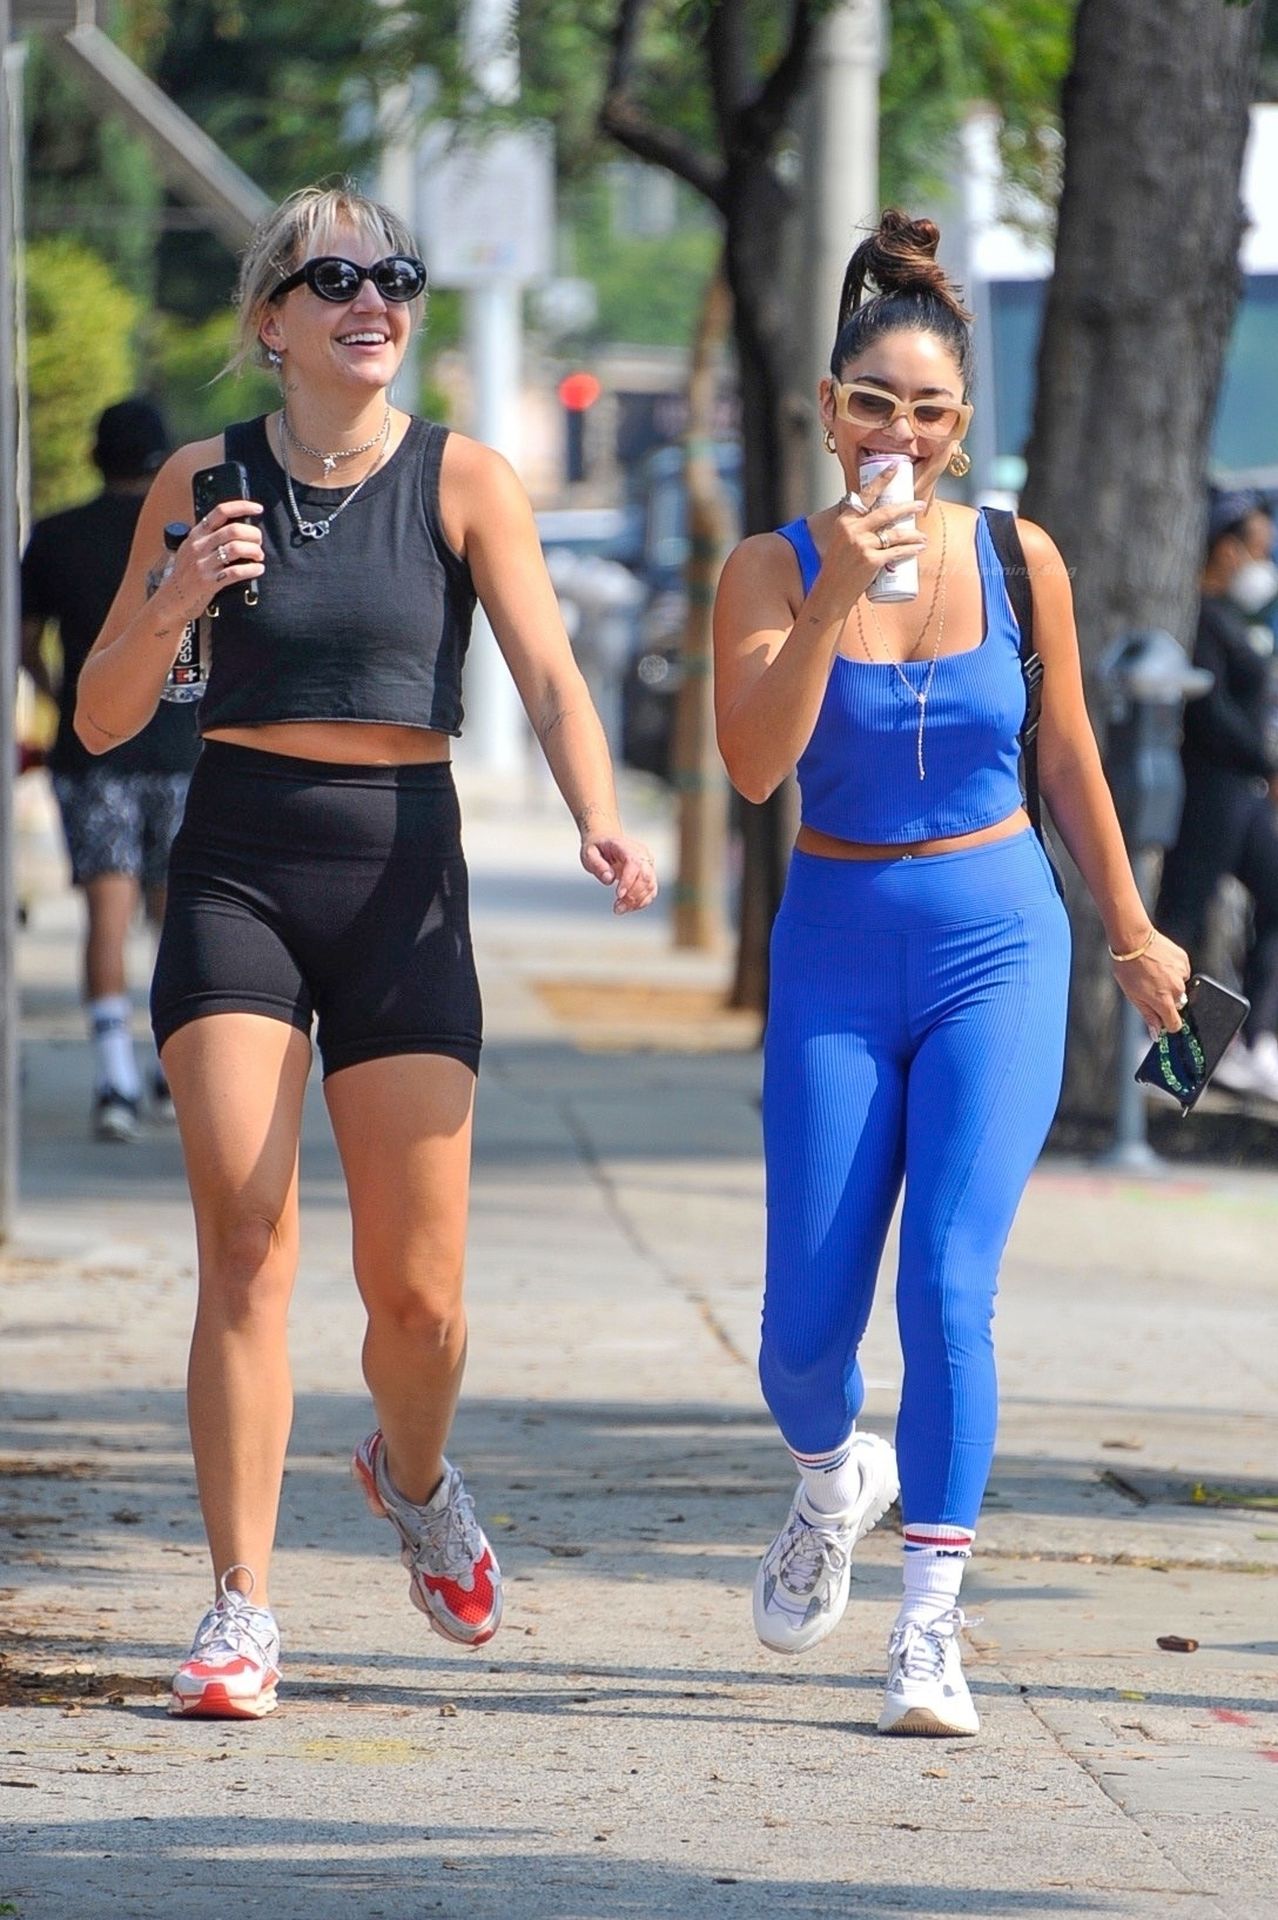 Vanessa Hudgens & GG Magree Team Up For a Morning Workout at Dogpound (151 Photos)